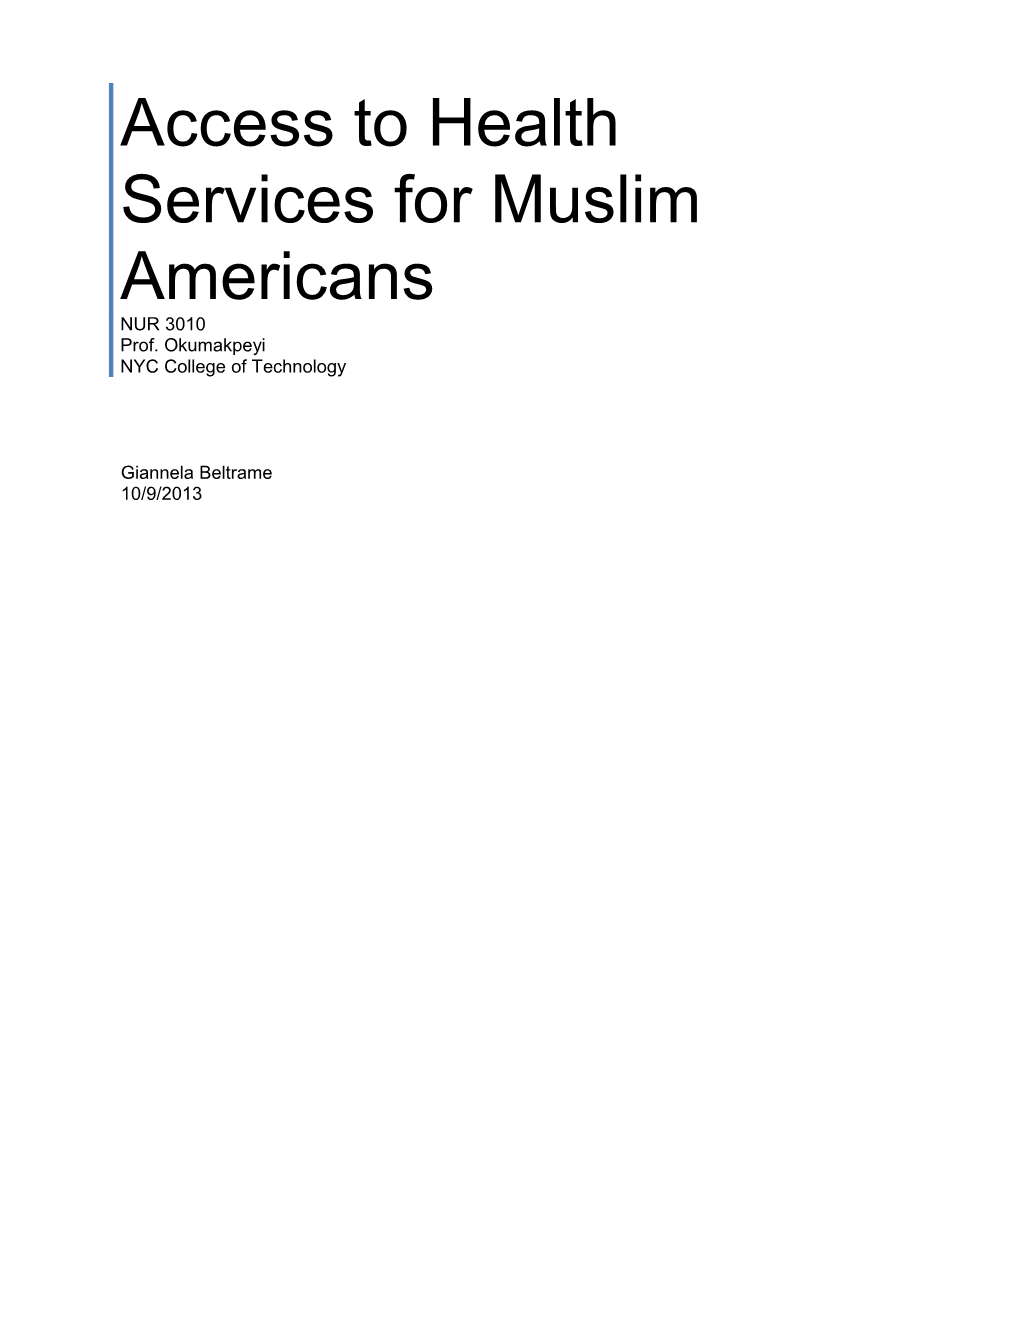 Access to Health Services for Muslim Americans